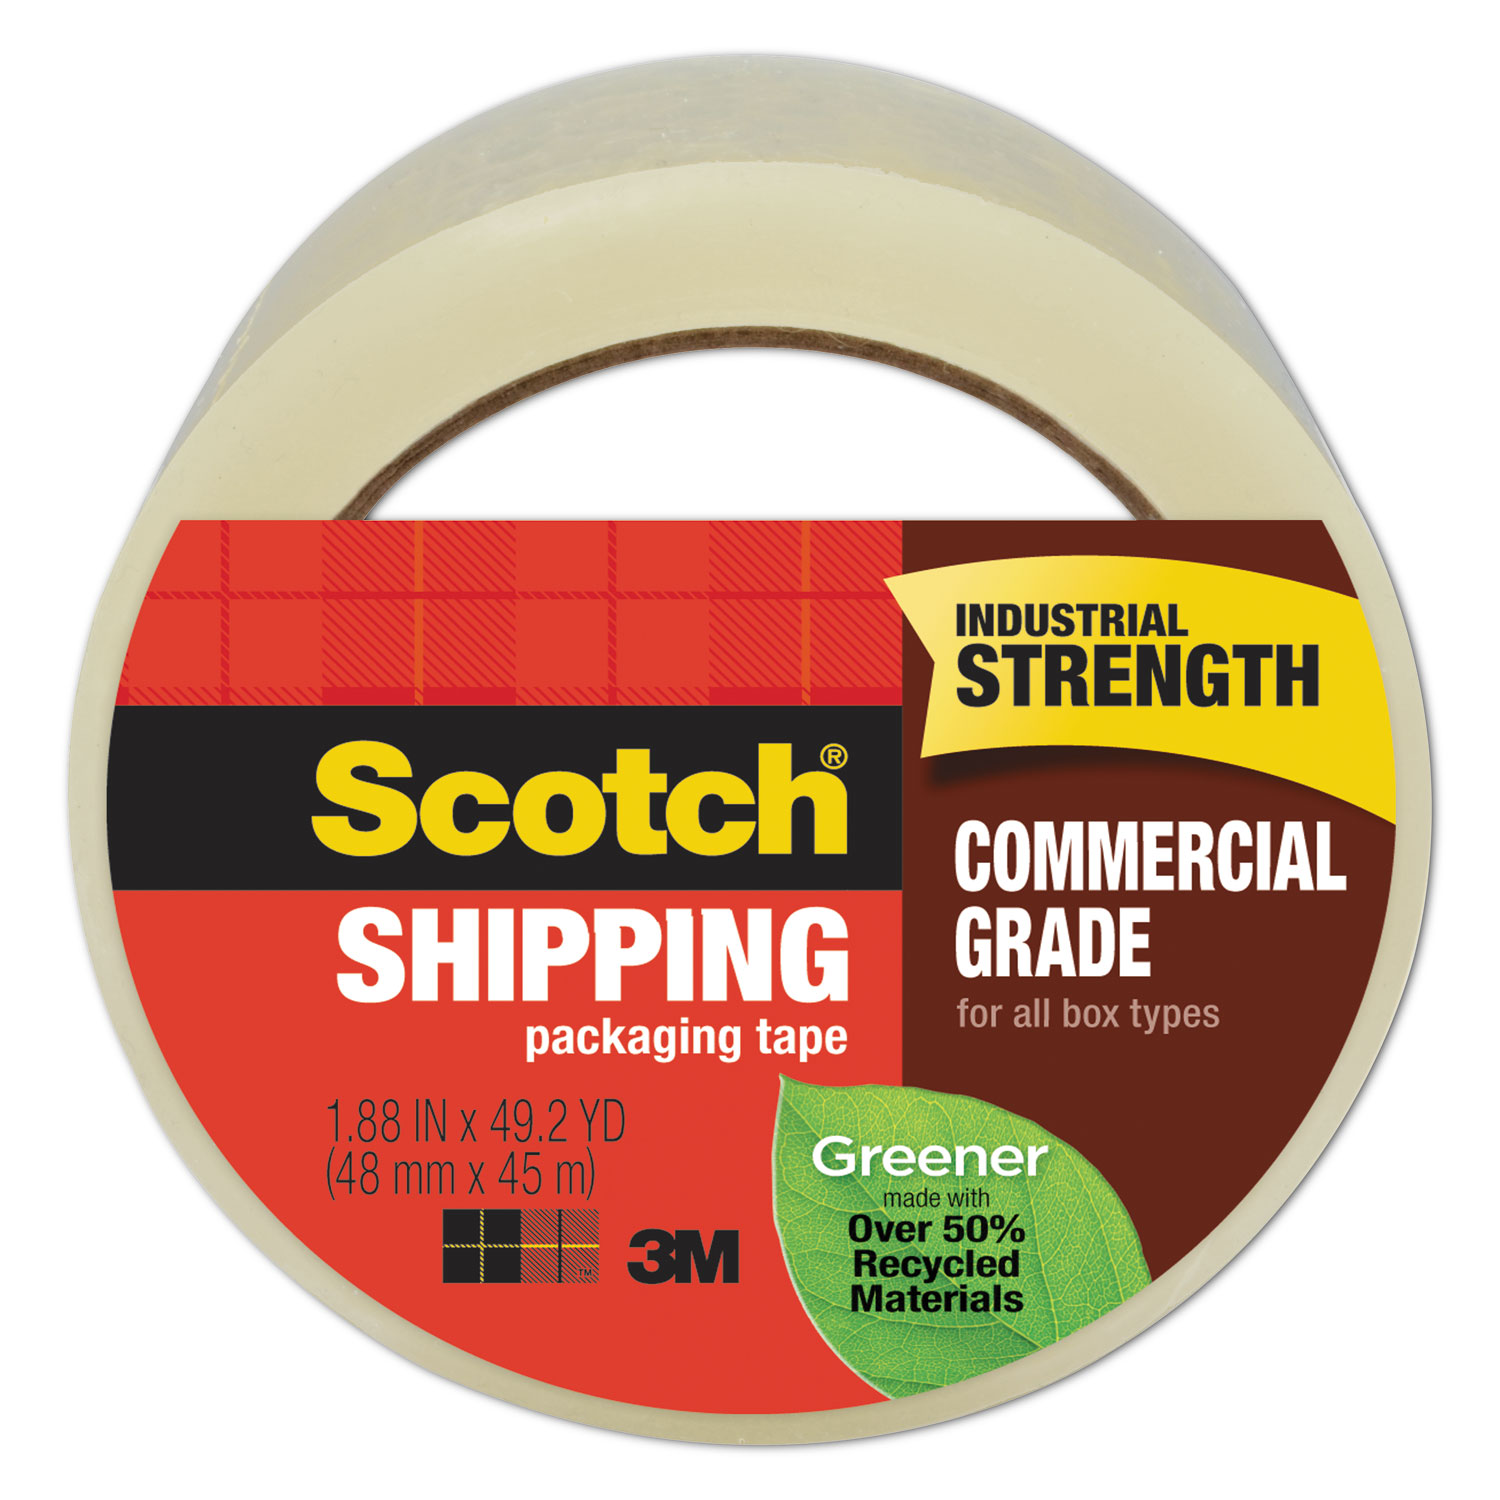  Scotch 3750G Greener Commercial Grade Packaging Tape, 3 Core, 1.88 x 49.2 yds, Clear (MMM3750G) 